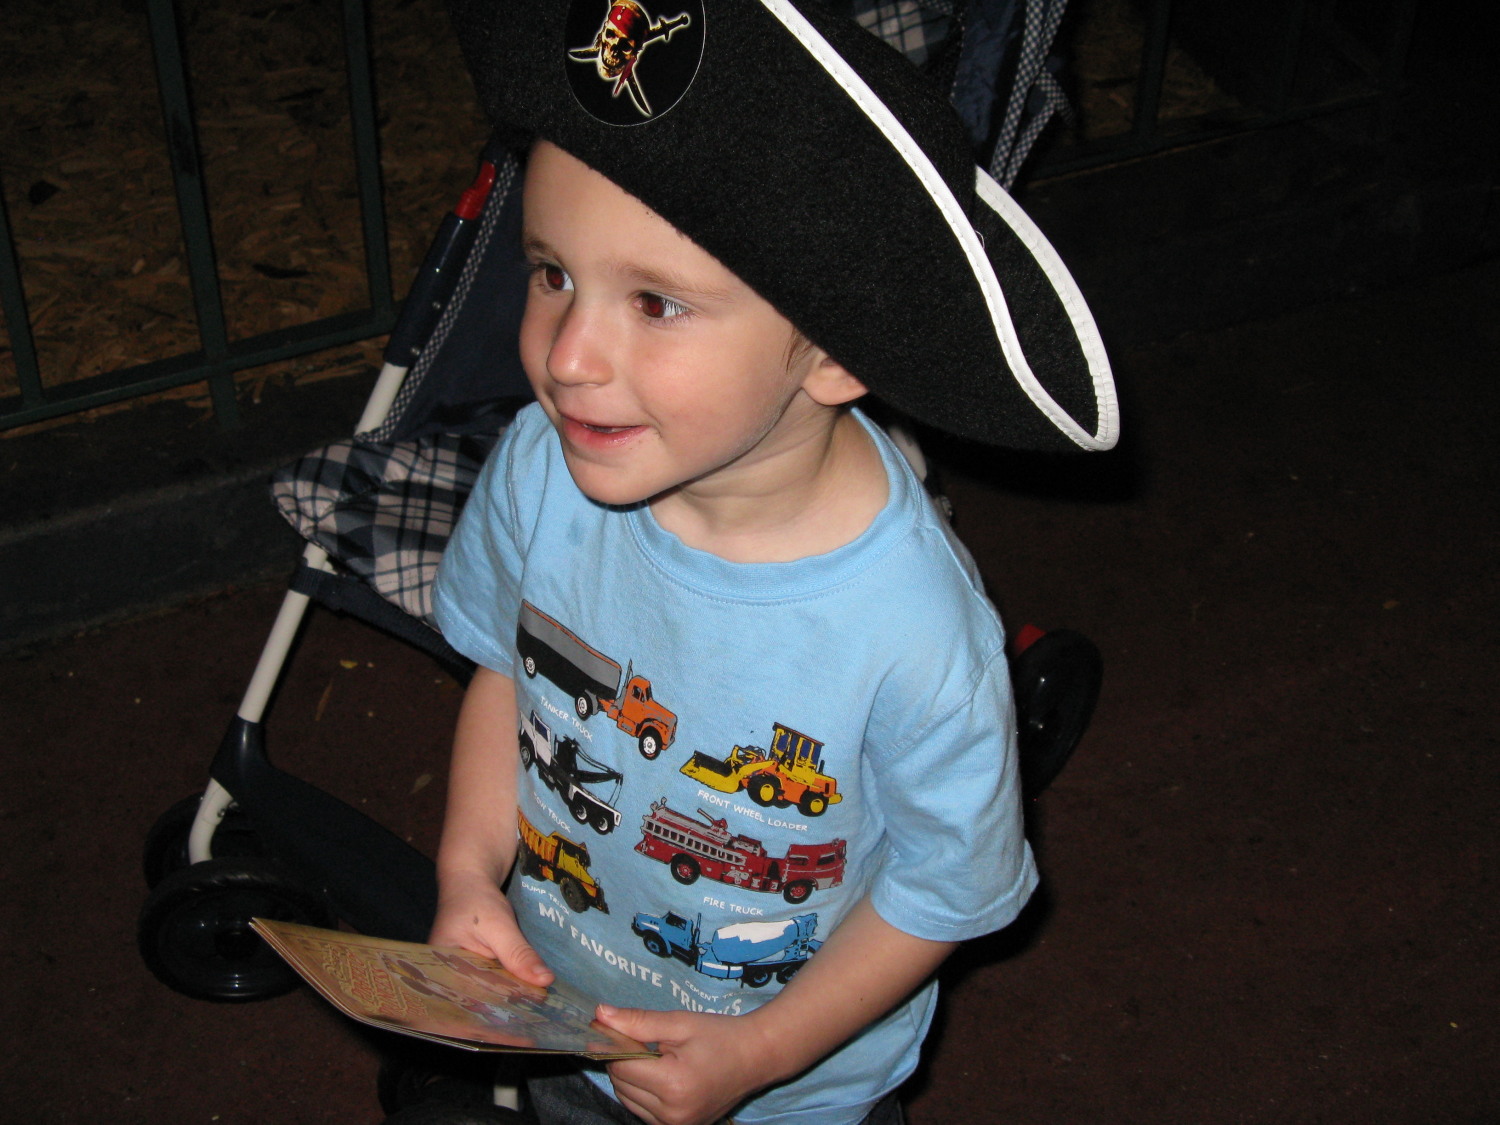 Pirates and Priness Party - Magic Kingdom